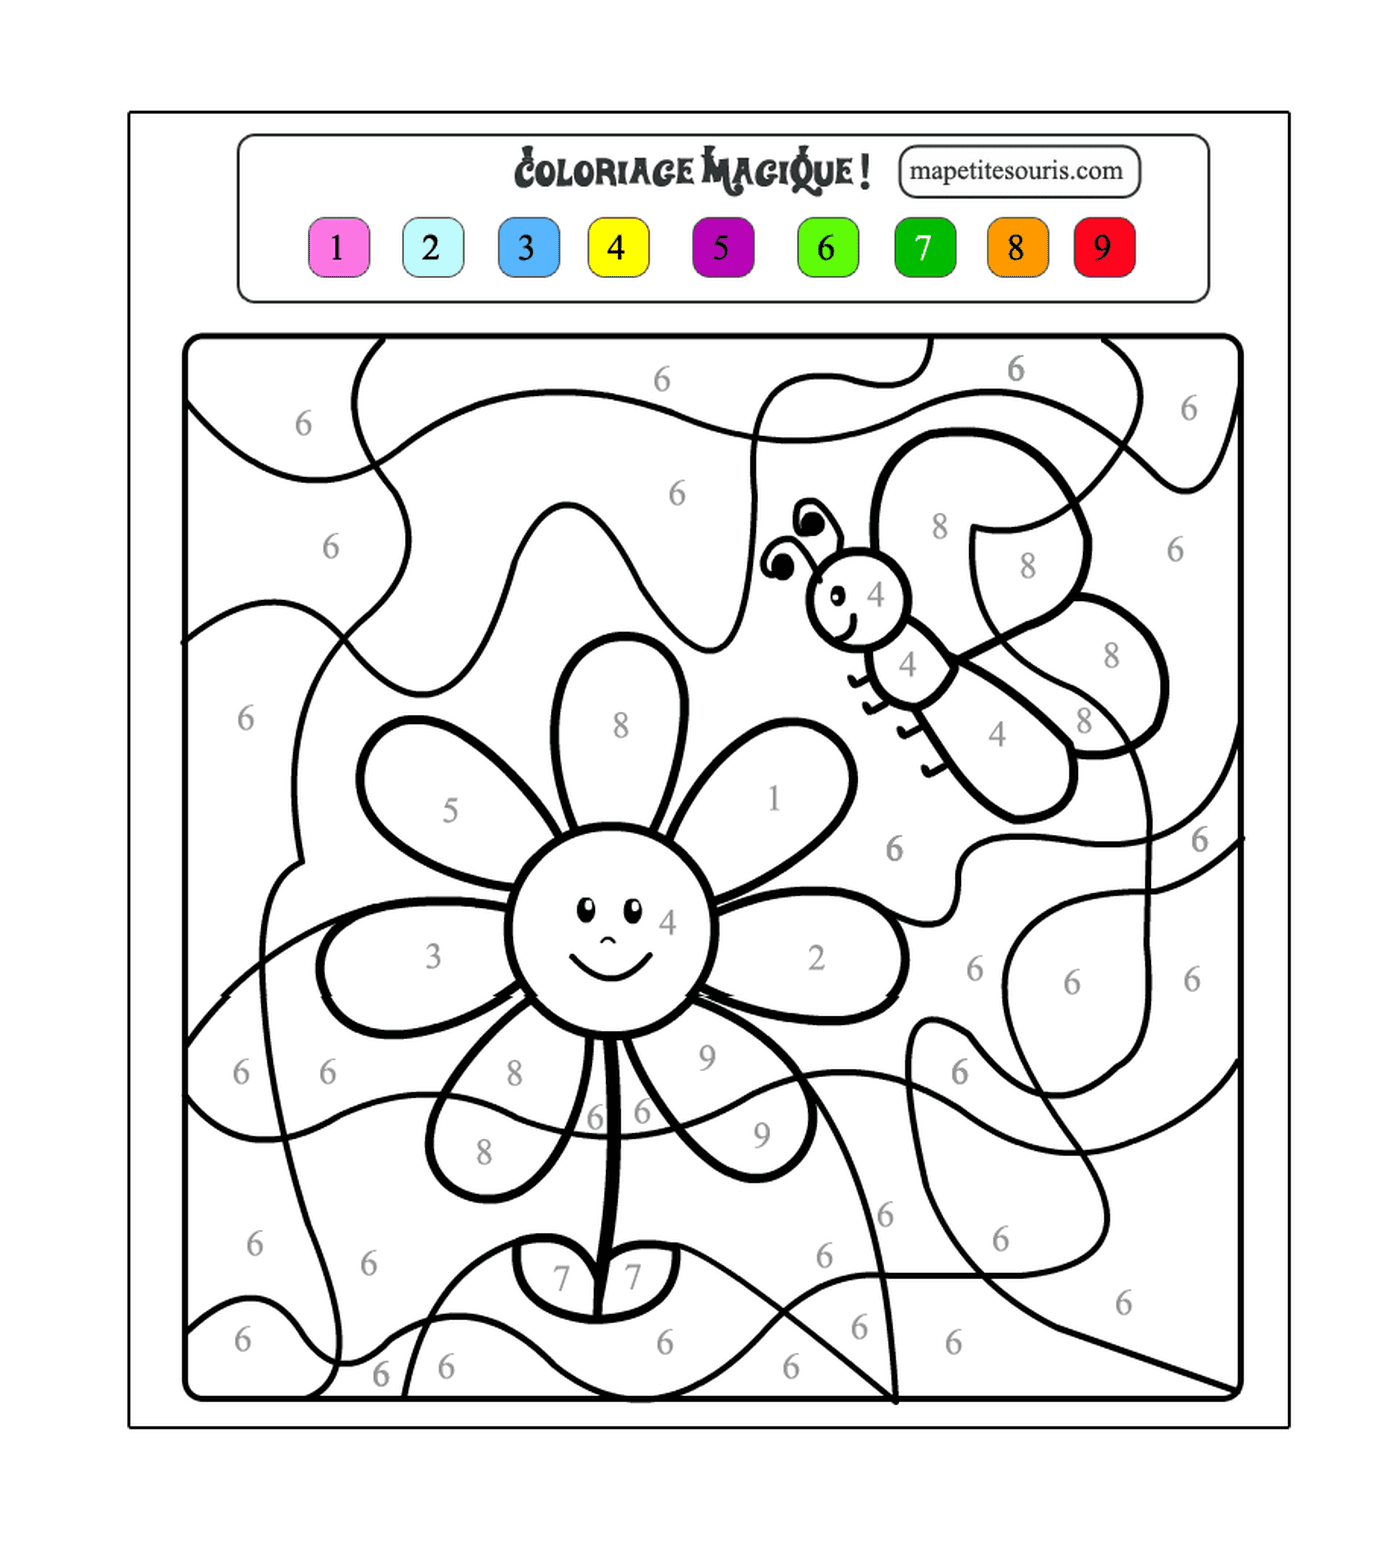  Magic coloring with butterfly and flower 